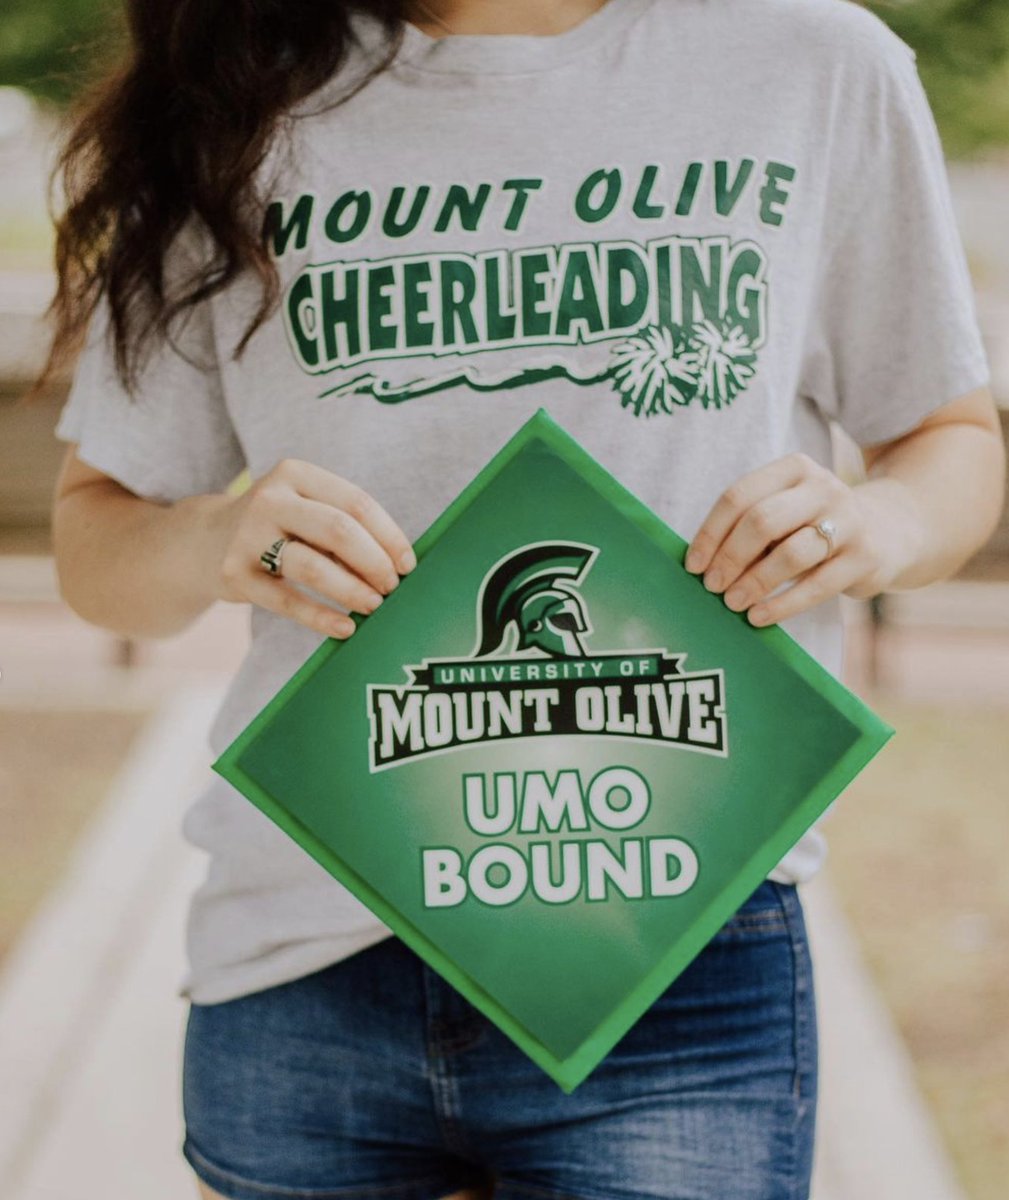 The University of Mount Olive is so excited for our incoming students arriving in the fall! It's going to be a great semester. #umobound